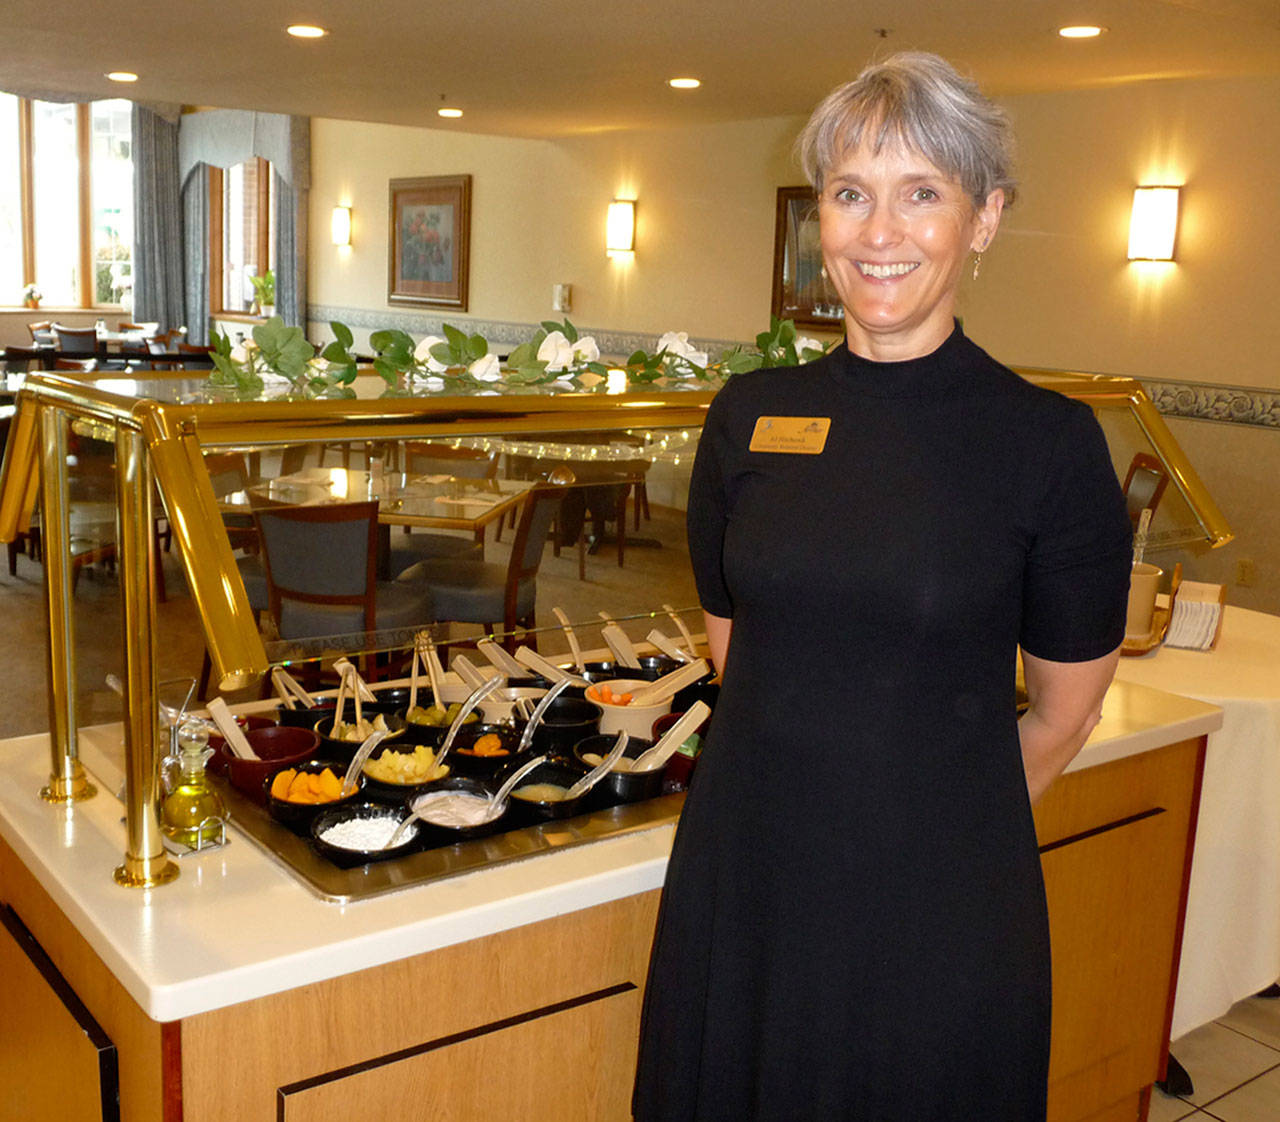 AJ Hitchcock, community relations director at The Fifth Avenue, invites the public to try what she terms “the best salad bar in Sequim.” Sequim Gazette photo by Patricia Morrison Coate